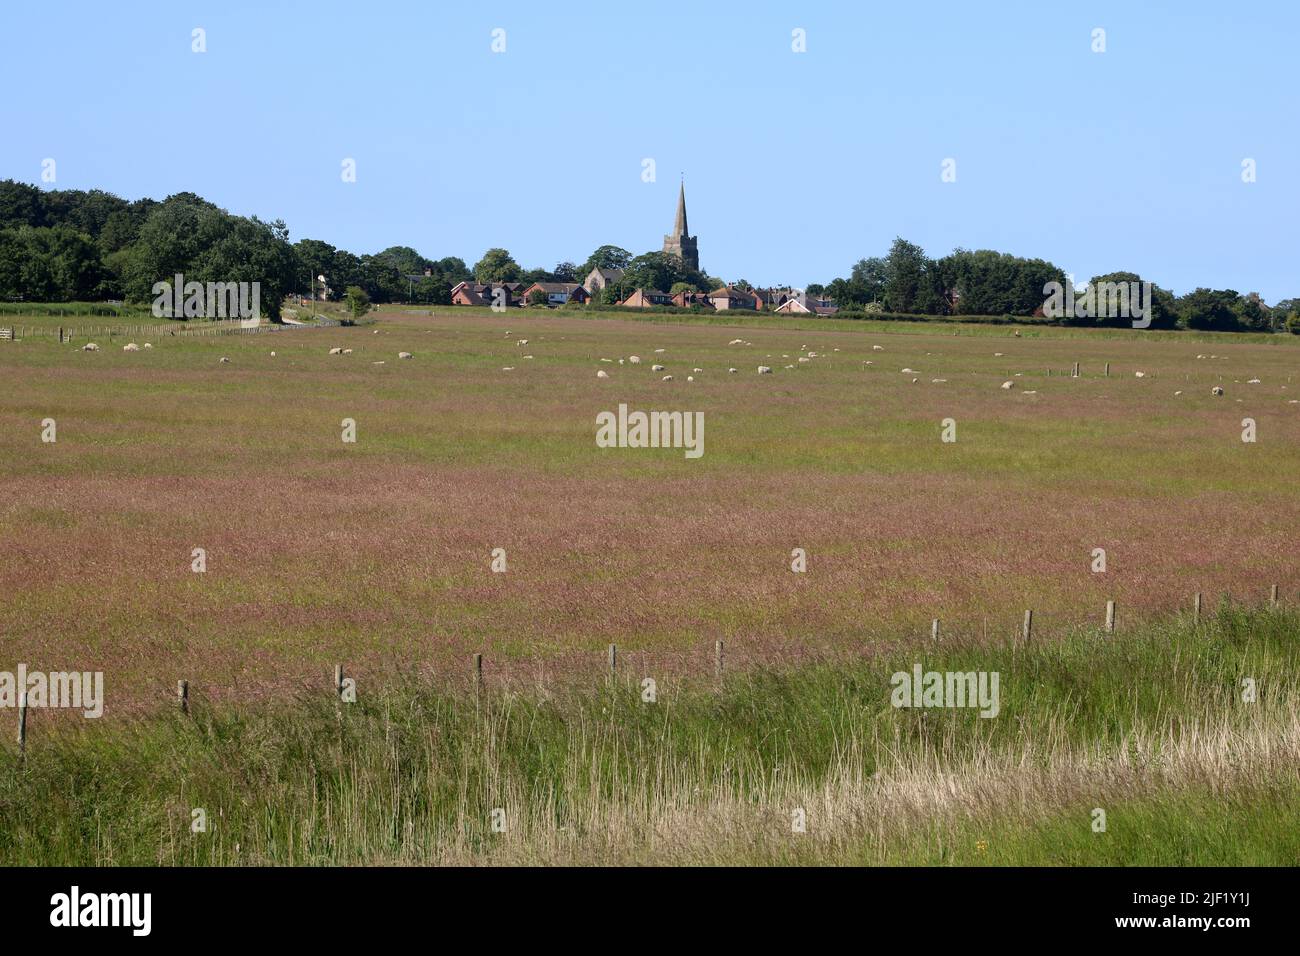 Pilling village , Lancashire seen from the sea wall looking across grassy field with grazing sheep on a sunny June morning under a clear blue sky. Stock Photo